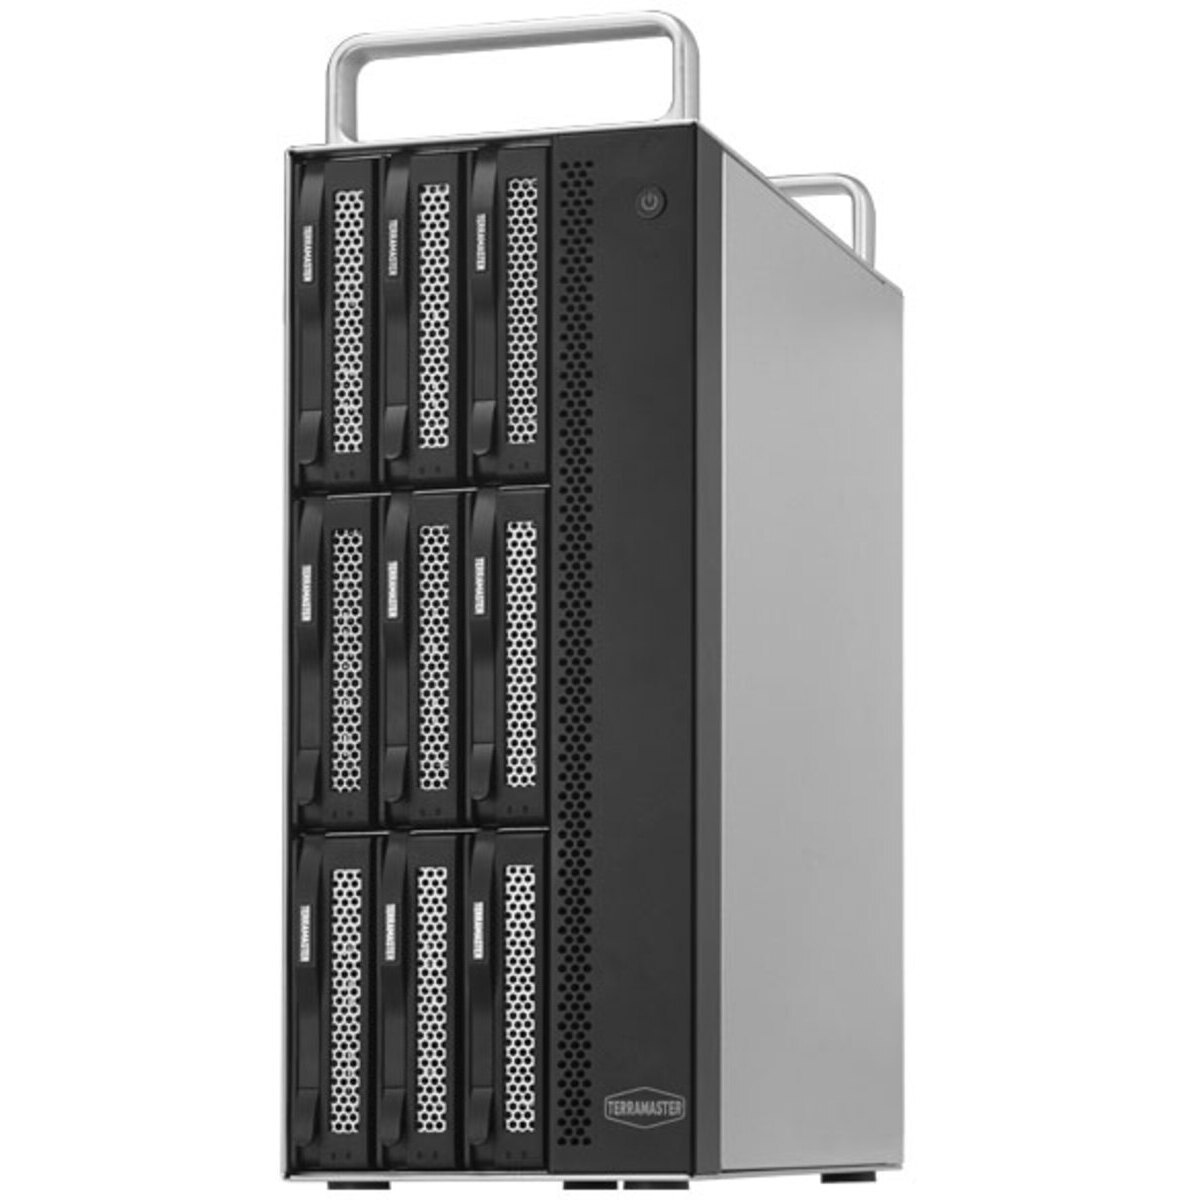 TerraMaster D8-322 8tb 8-Bay Desktop Multimedia / Power User / Business DAS - Direct Attached Storage Device 4x2tb Sandisk Ultra 3D SDSSDH3-2T00 2.5 560/520MB/s SATA 6Gb/s SSD CONSUMER Class Drives Installed - Burn-In Tested D8-322